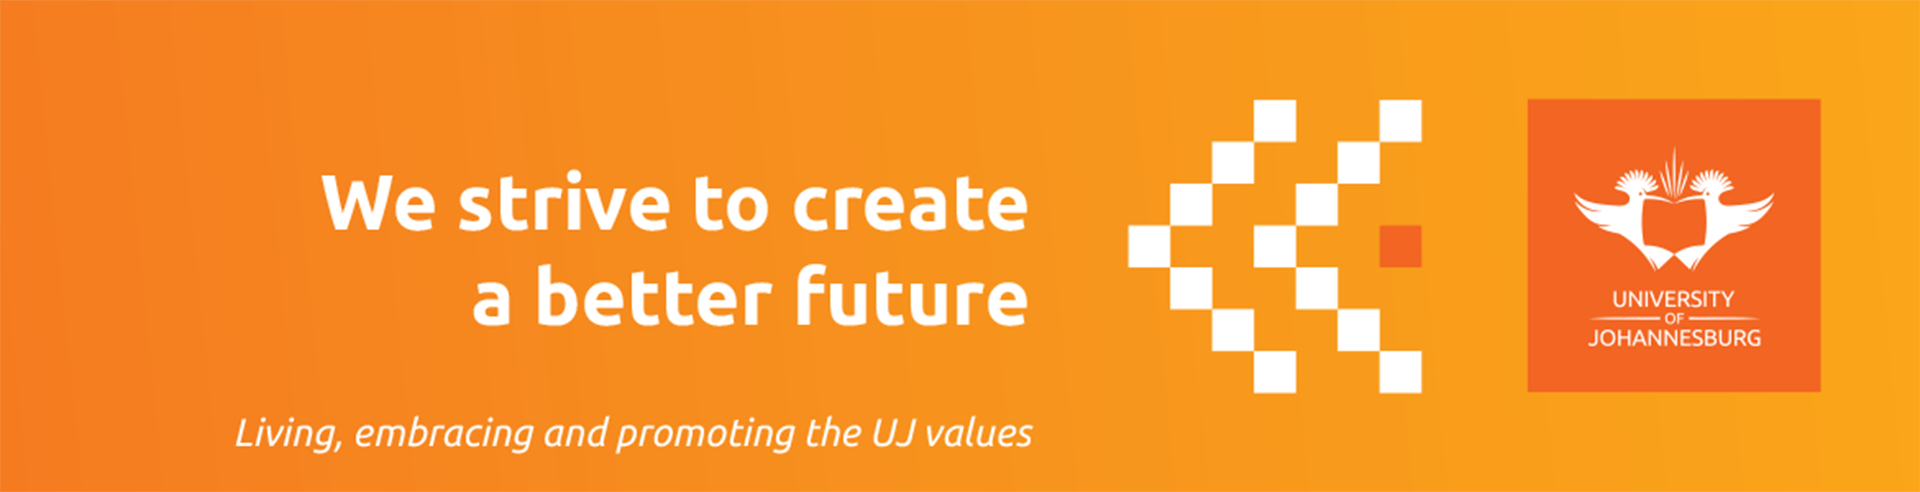 Uj Values Expressions Posters 2020 Ulink 1170x300mm 9